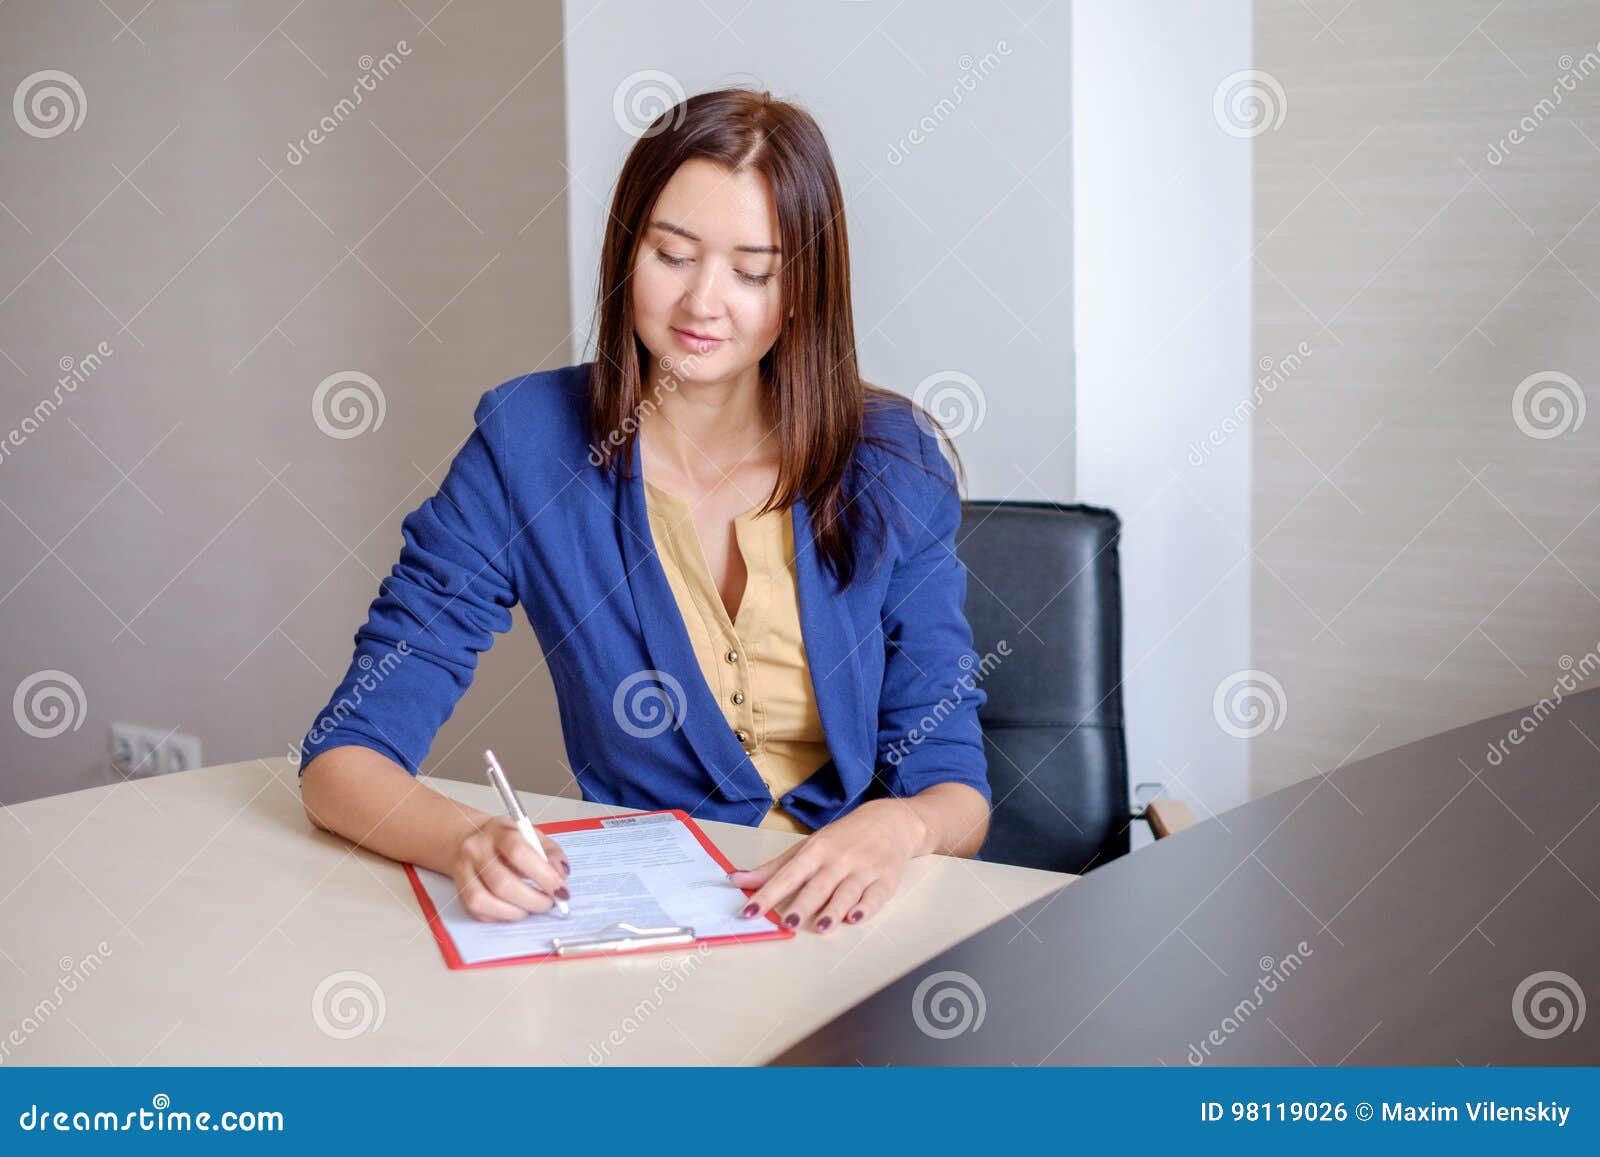 Young Businesswoman Working At Desk In Office Taking Notes Into